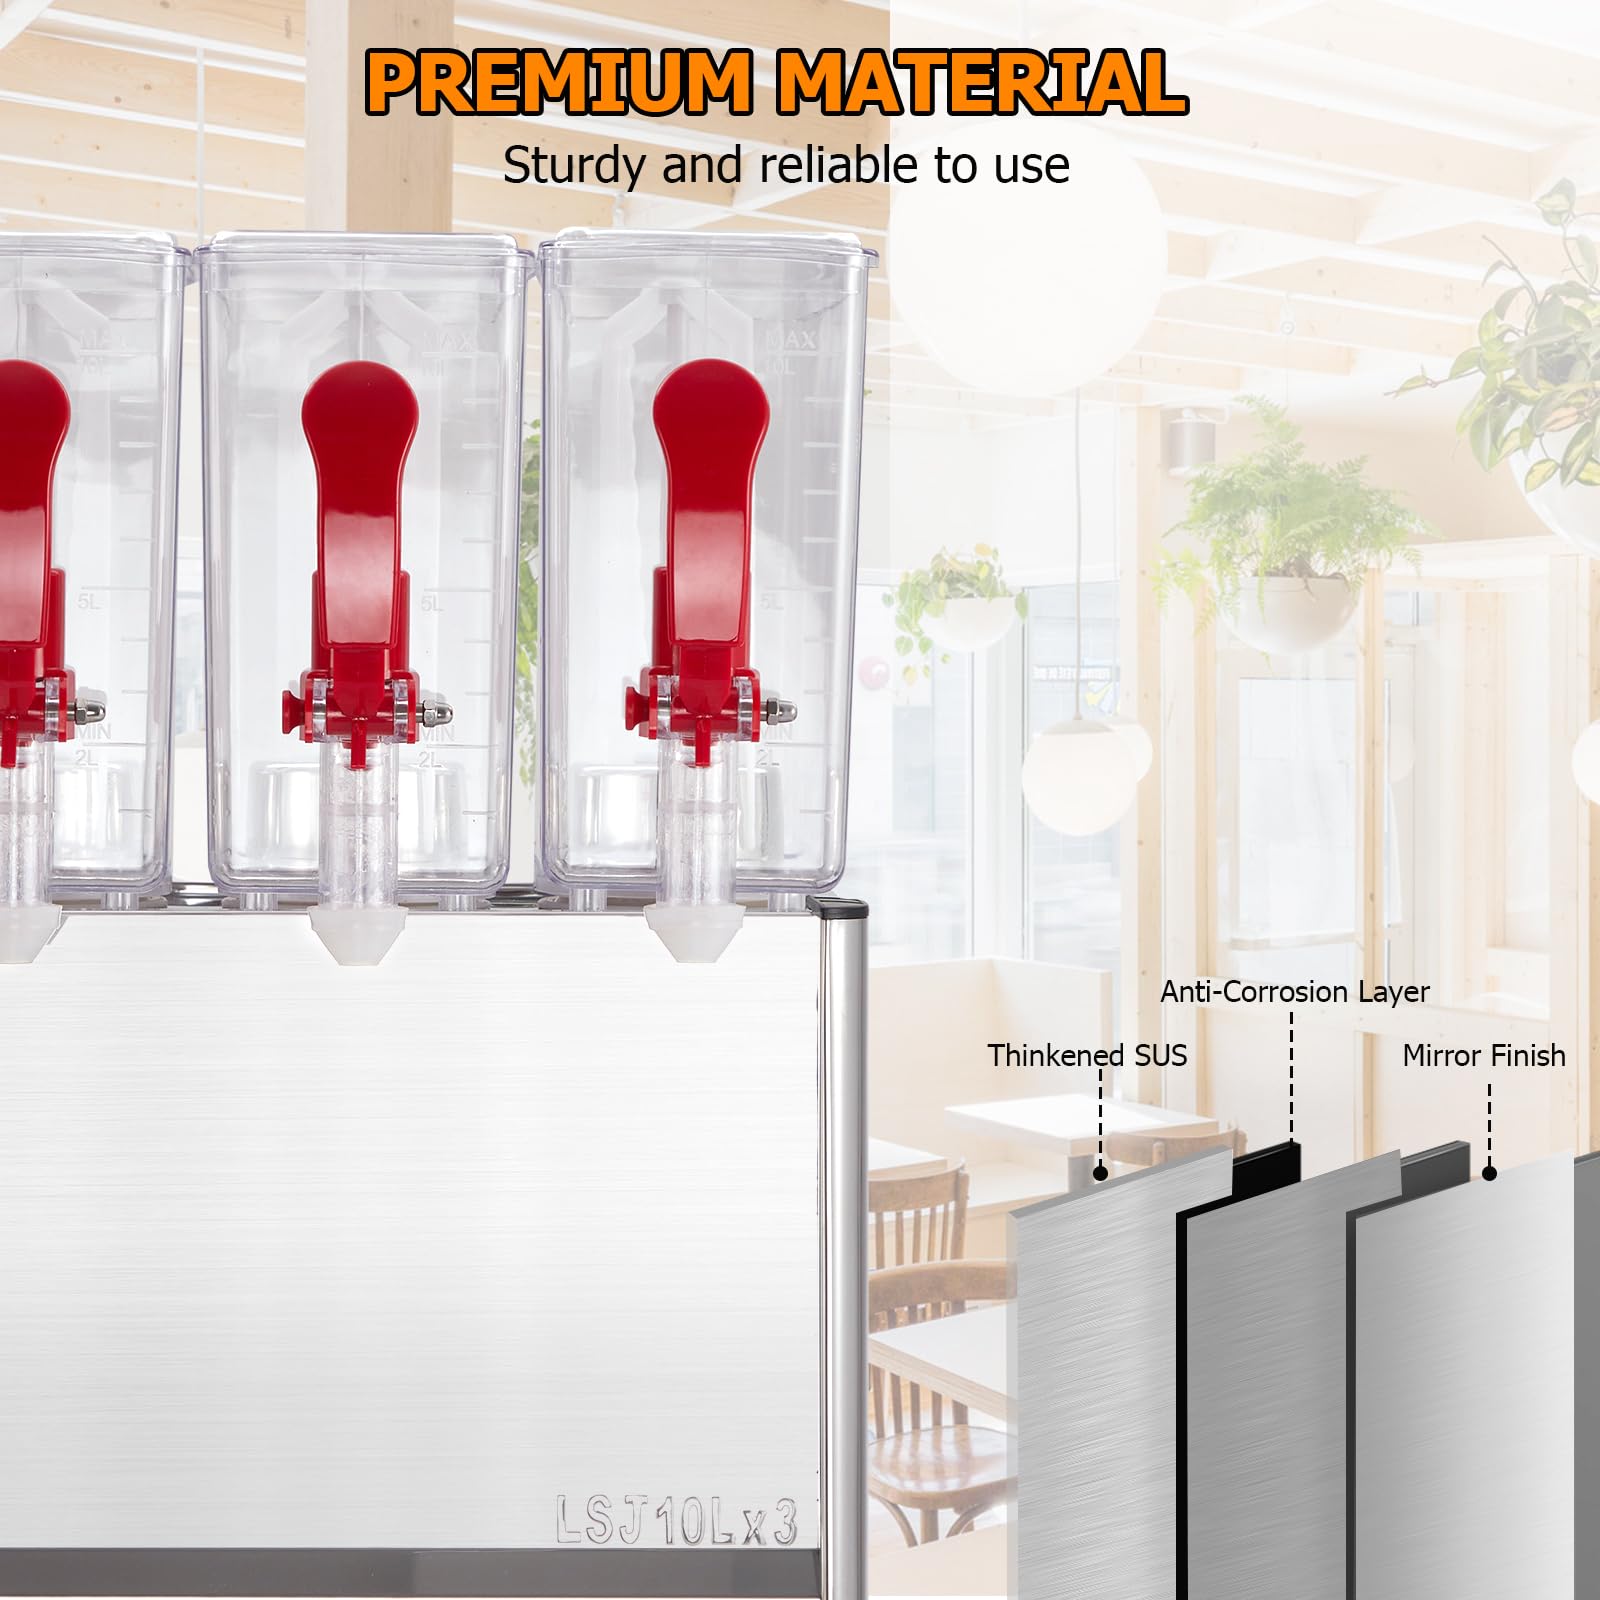 10x3L Commercial Beverage Dispenser, 320W, Stainless Steel